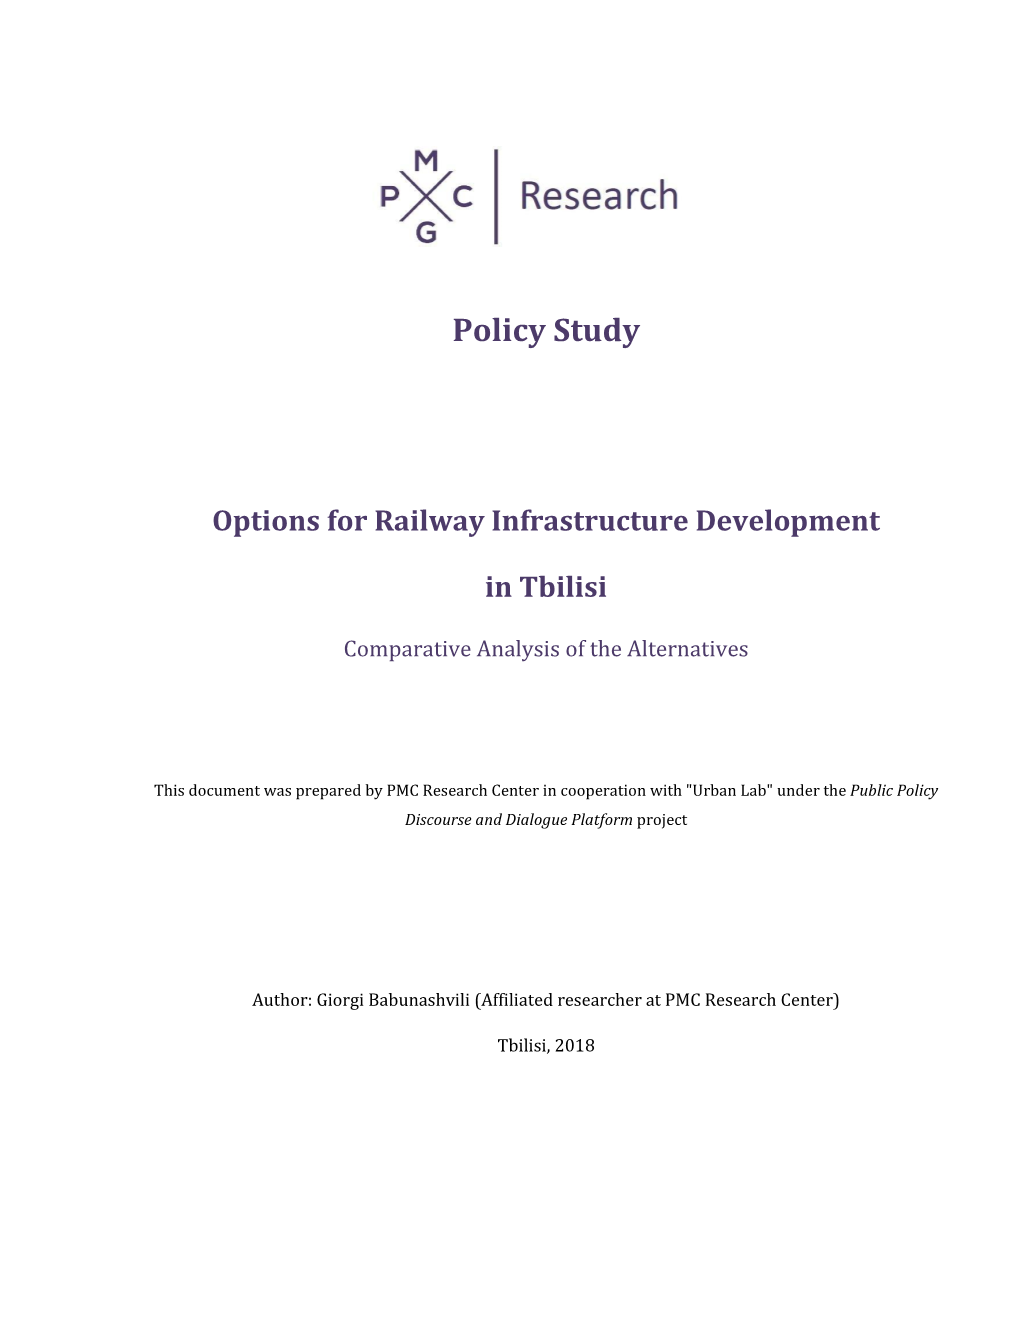 Policy Study Options for Railway Infrastructure Development in Tbilisi